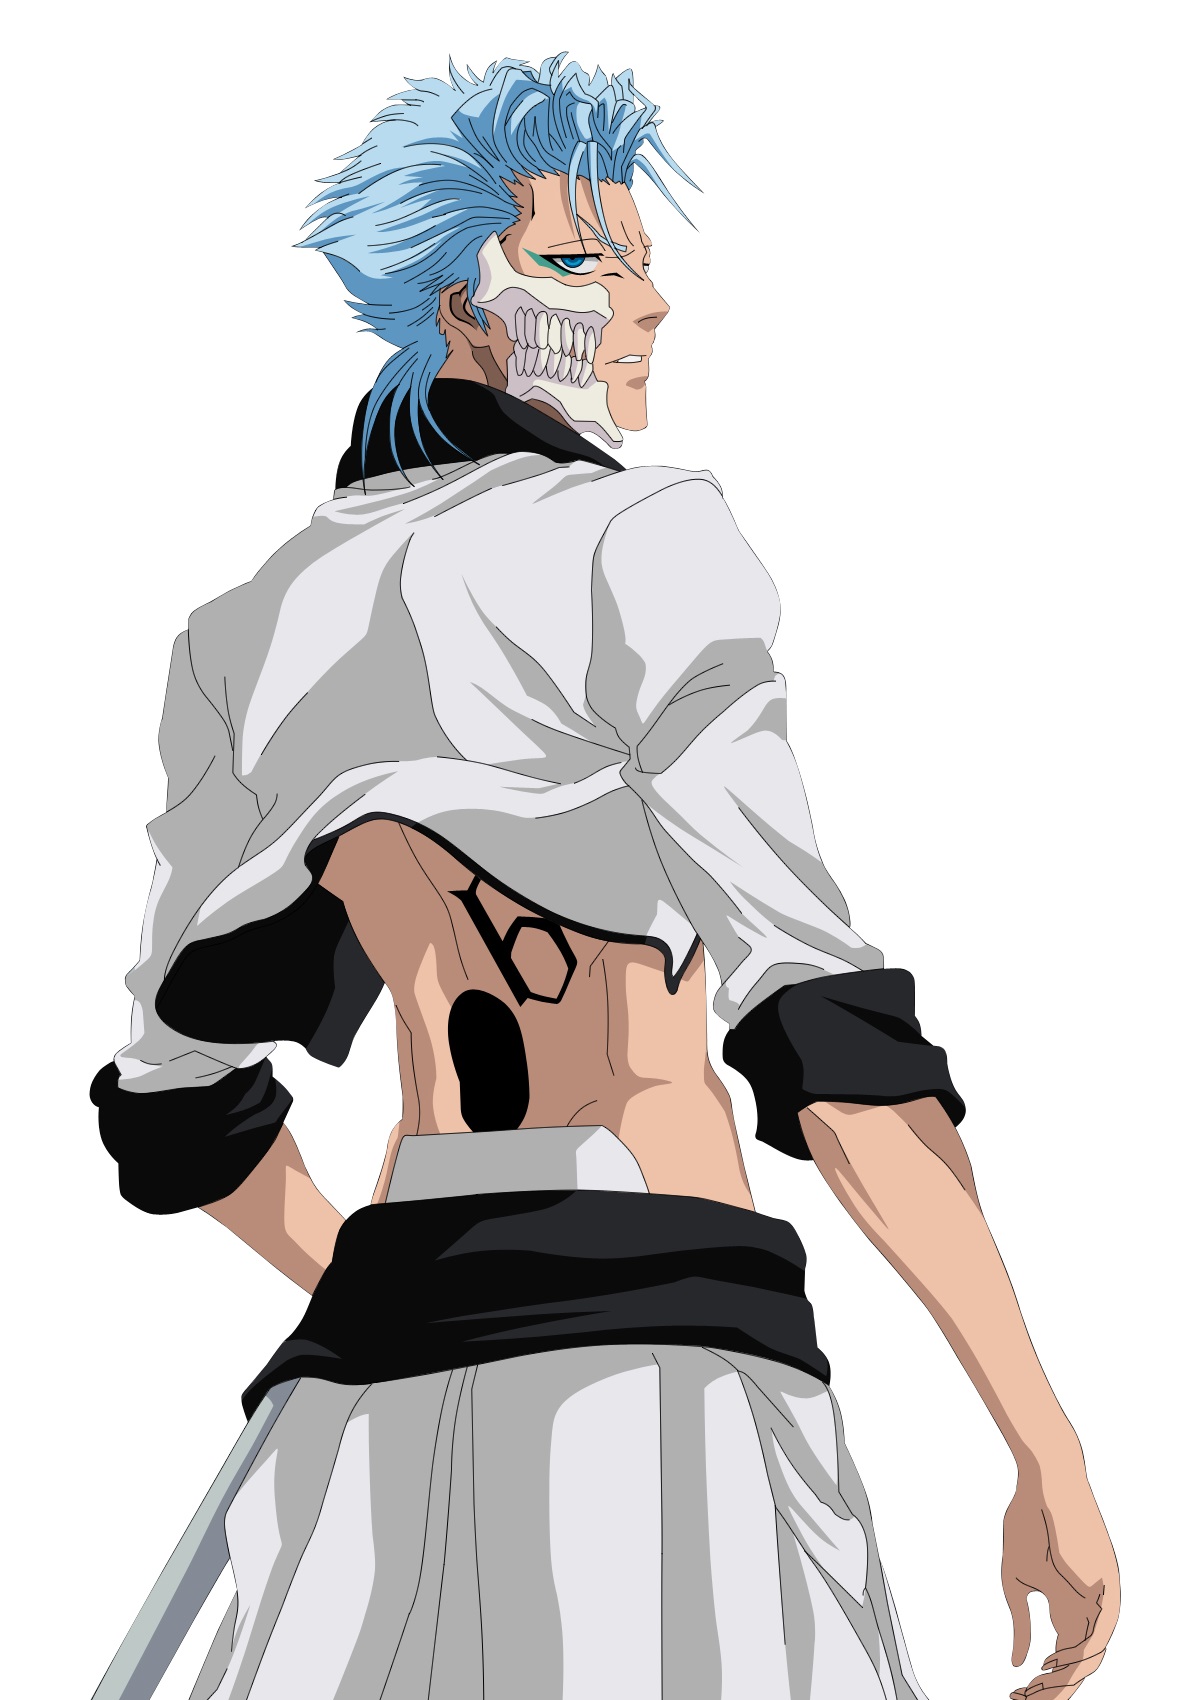 Grimmjow back view